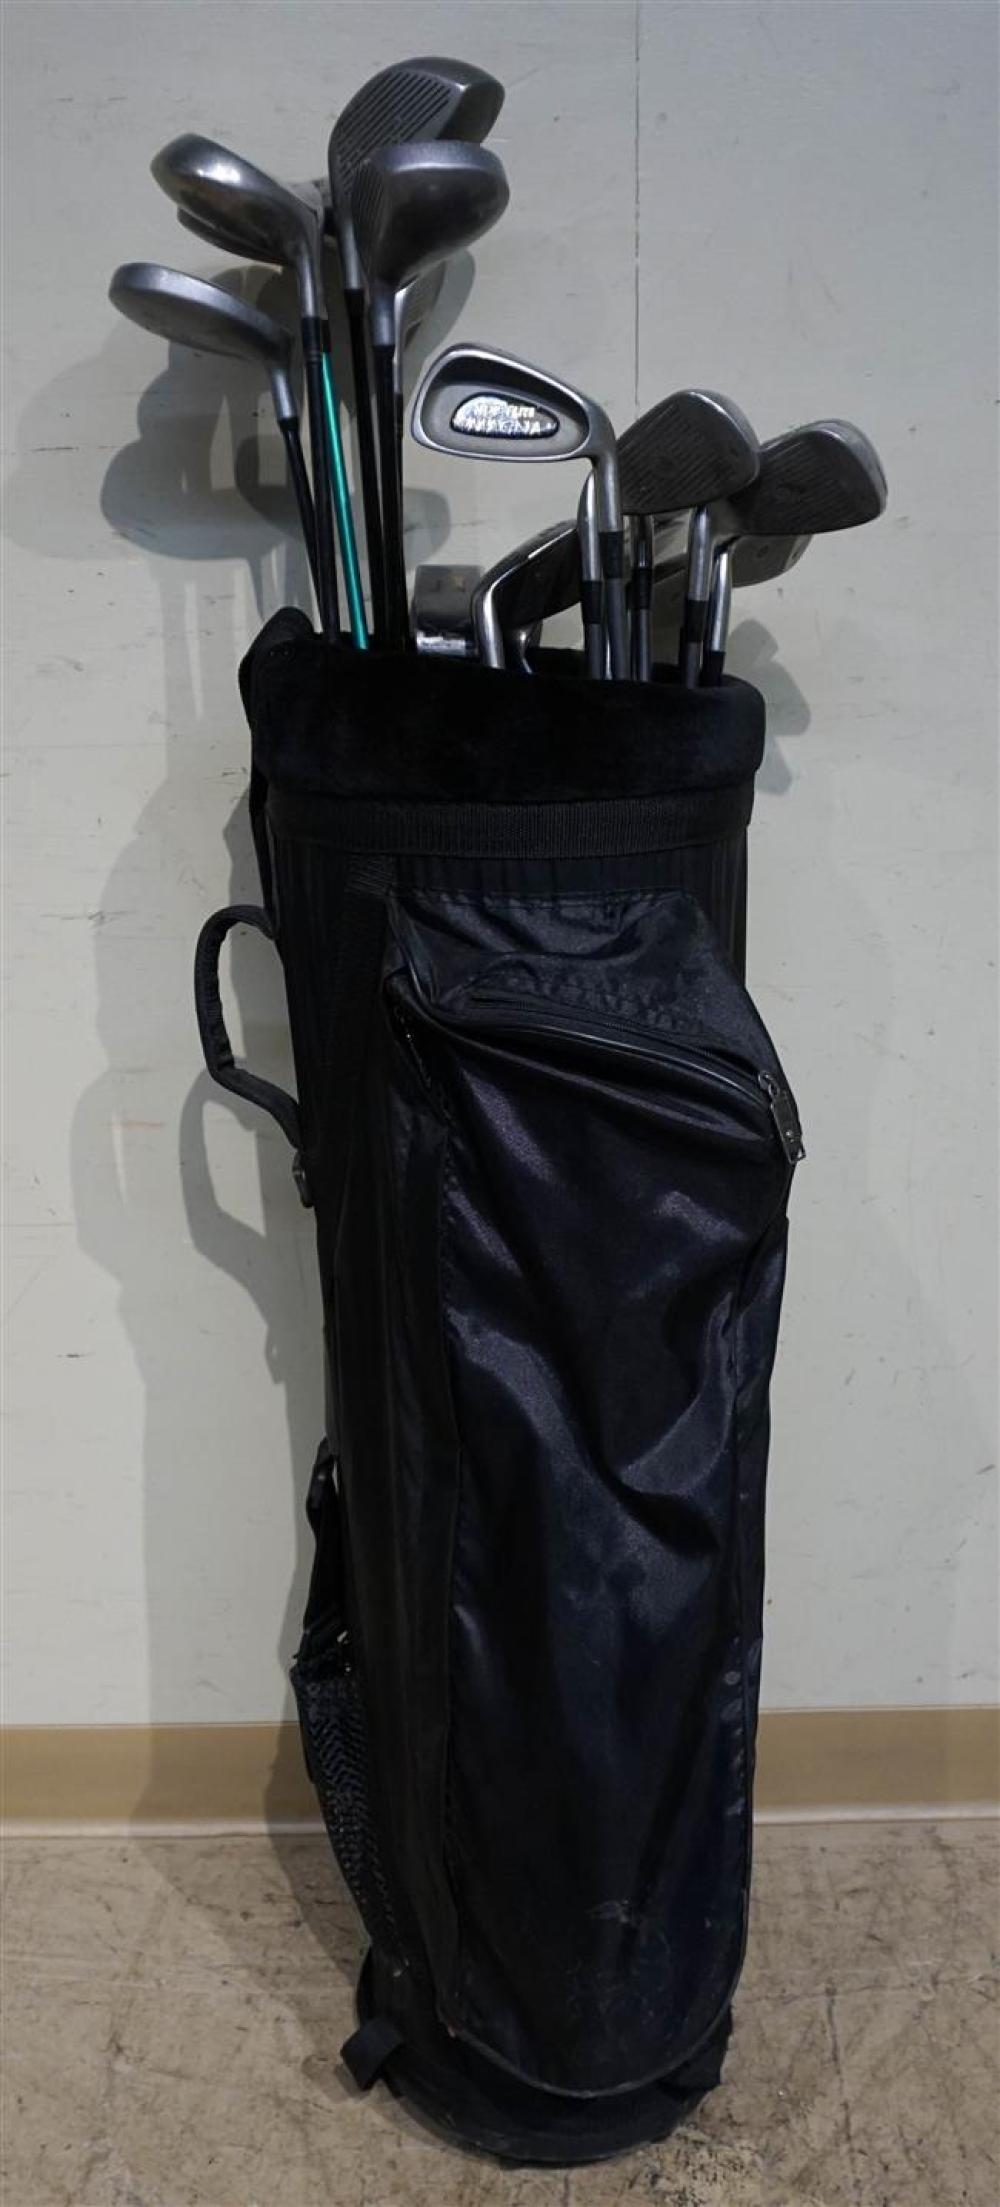 ASSEMBLED SET OF GOLF CLUBS WITH BAGAssembled